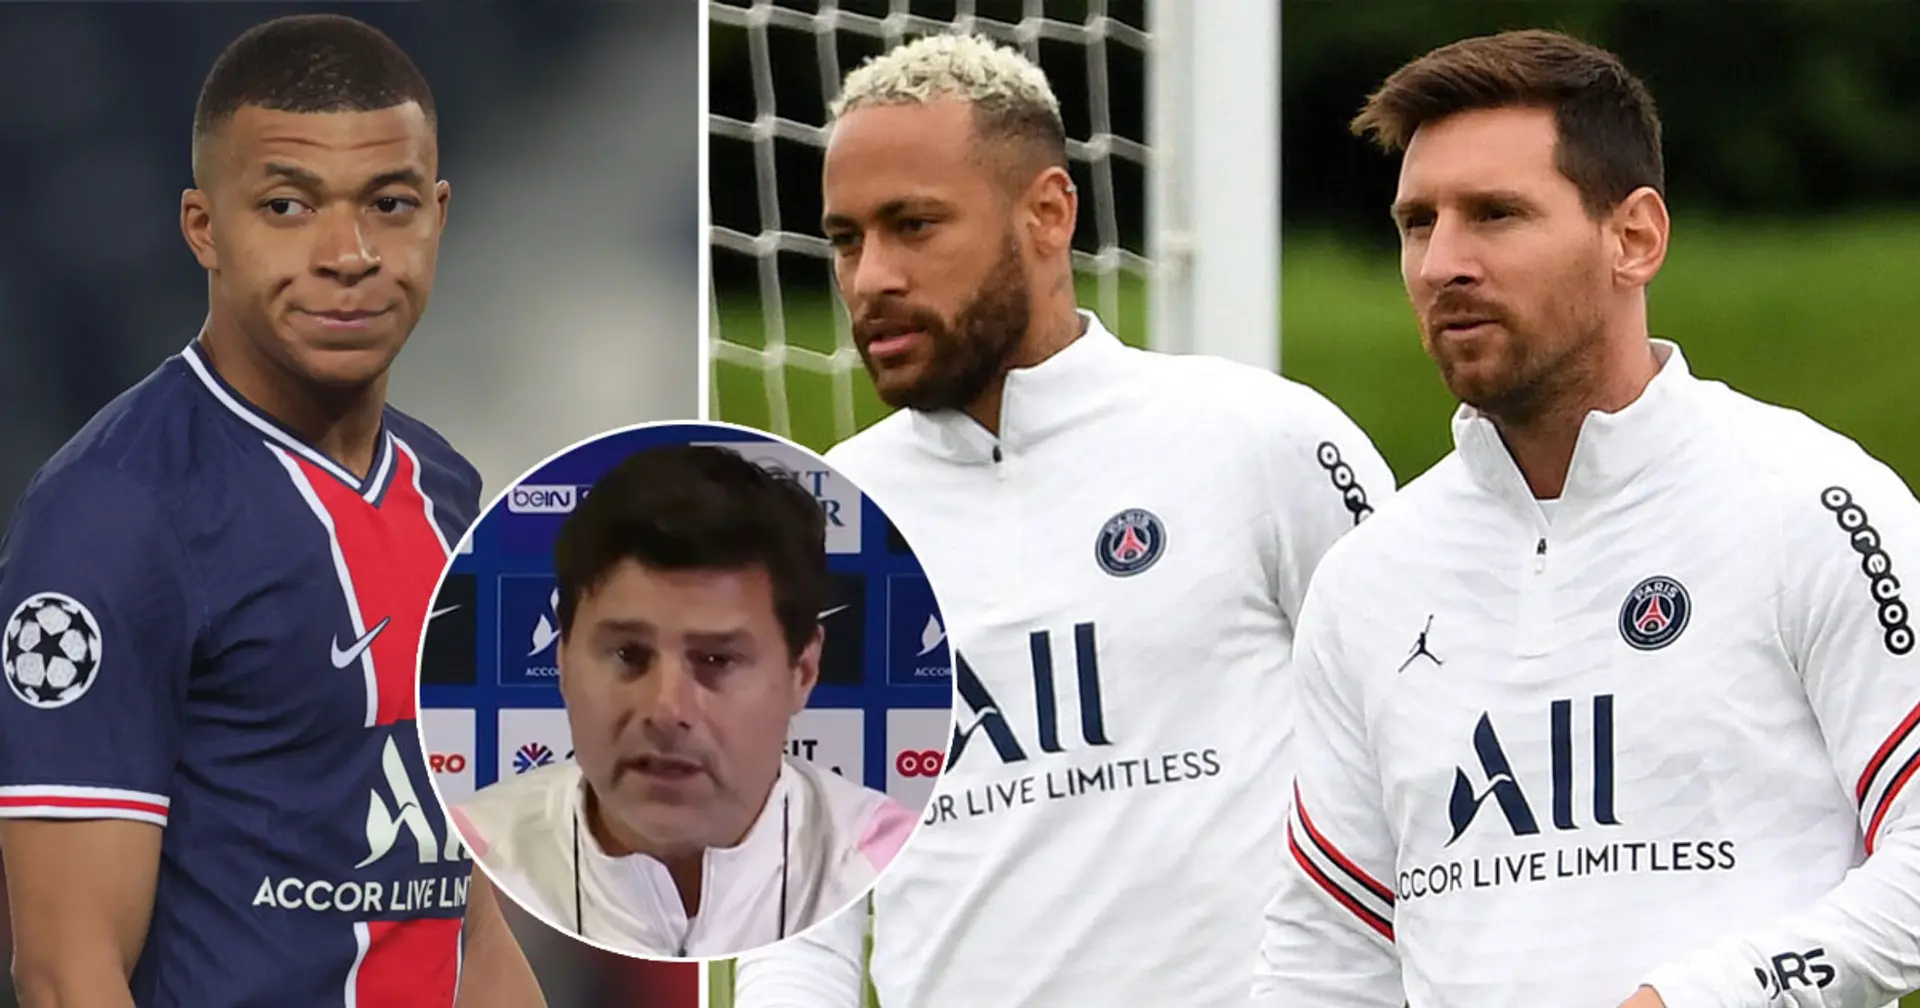 'Messi, Neymar, Di Maria know each other well': Pochettino admits Mbappe is odd one out in PSG's attack